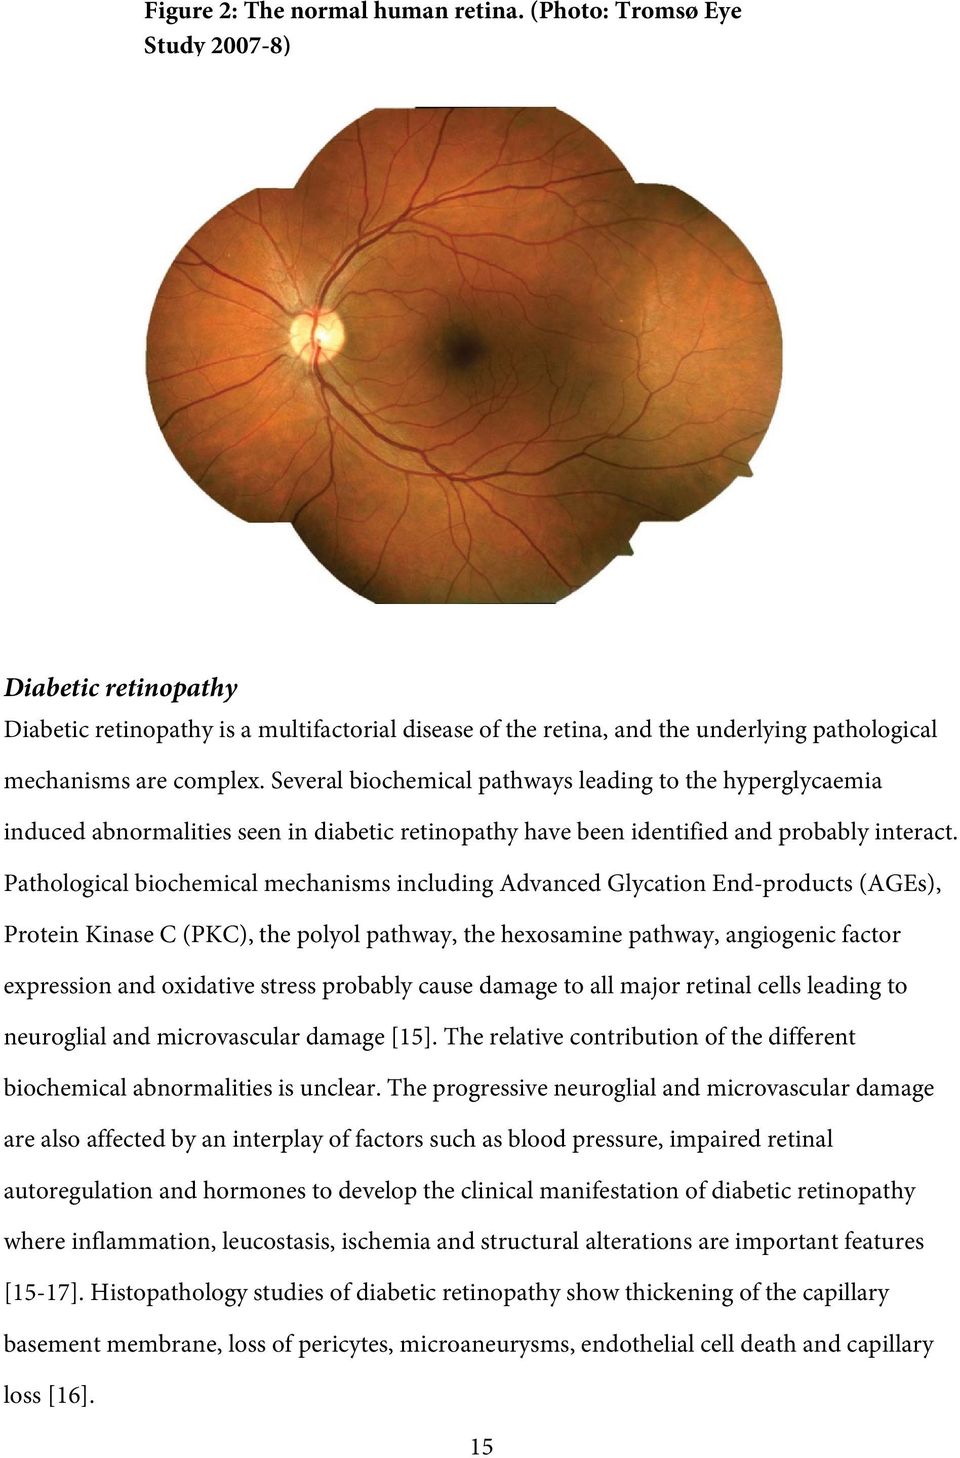 Several biohemial pathways leading to the hyperglyaemia indued abnormalities seen in diabeti retinopathy have been identified and probably interat.